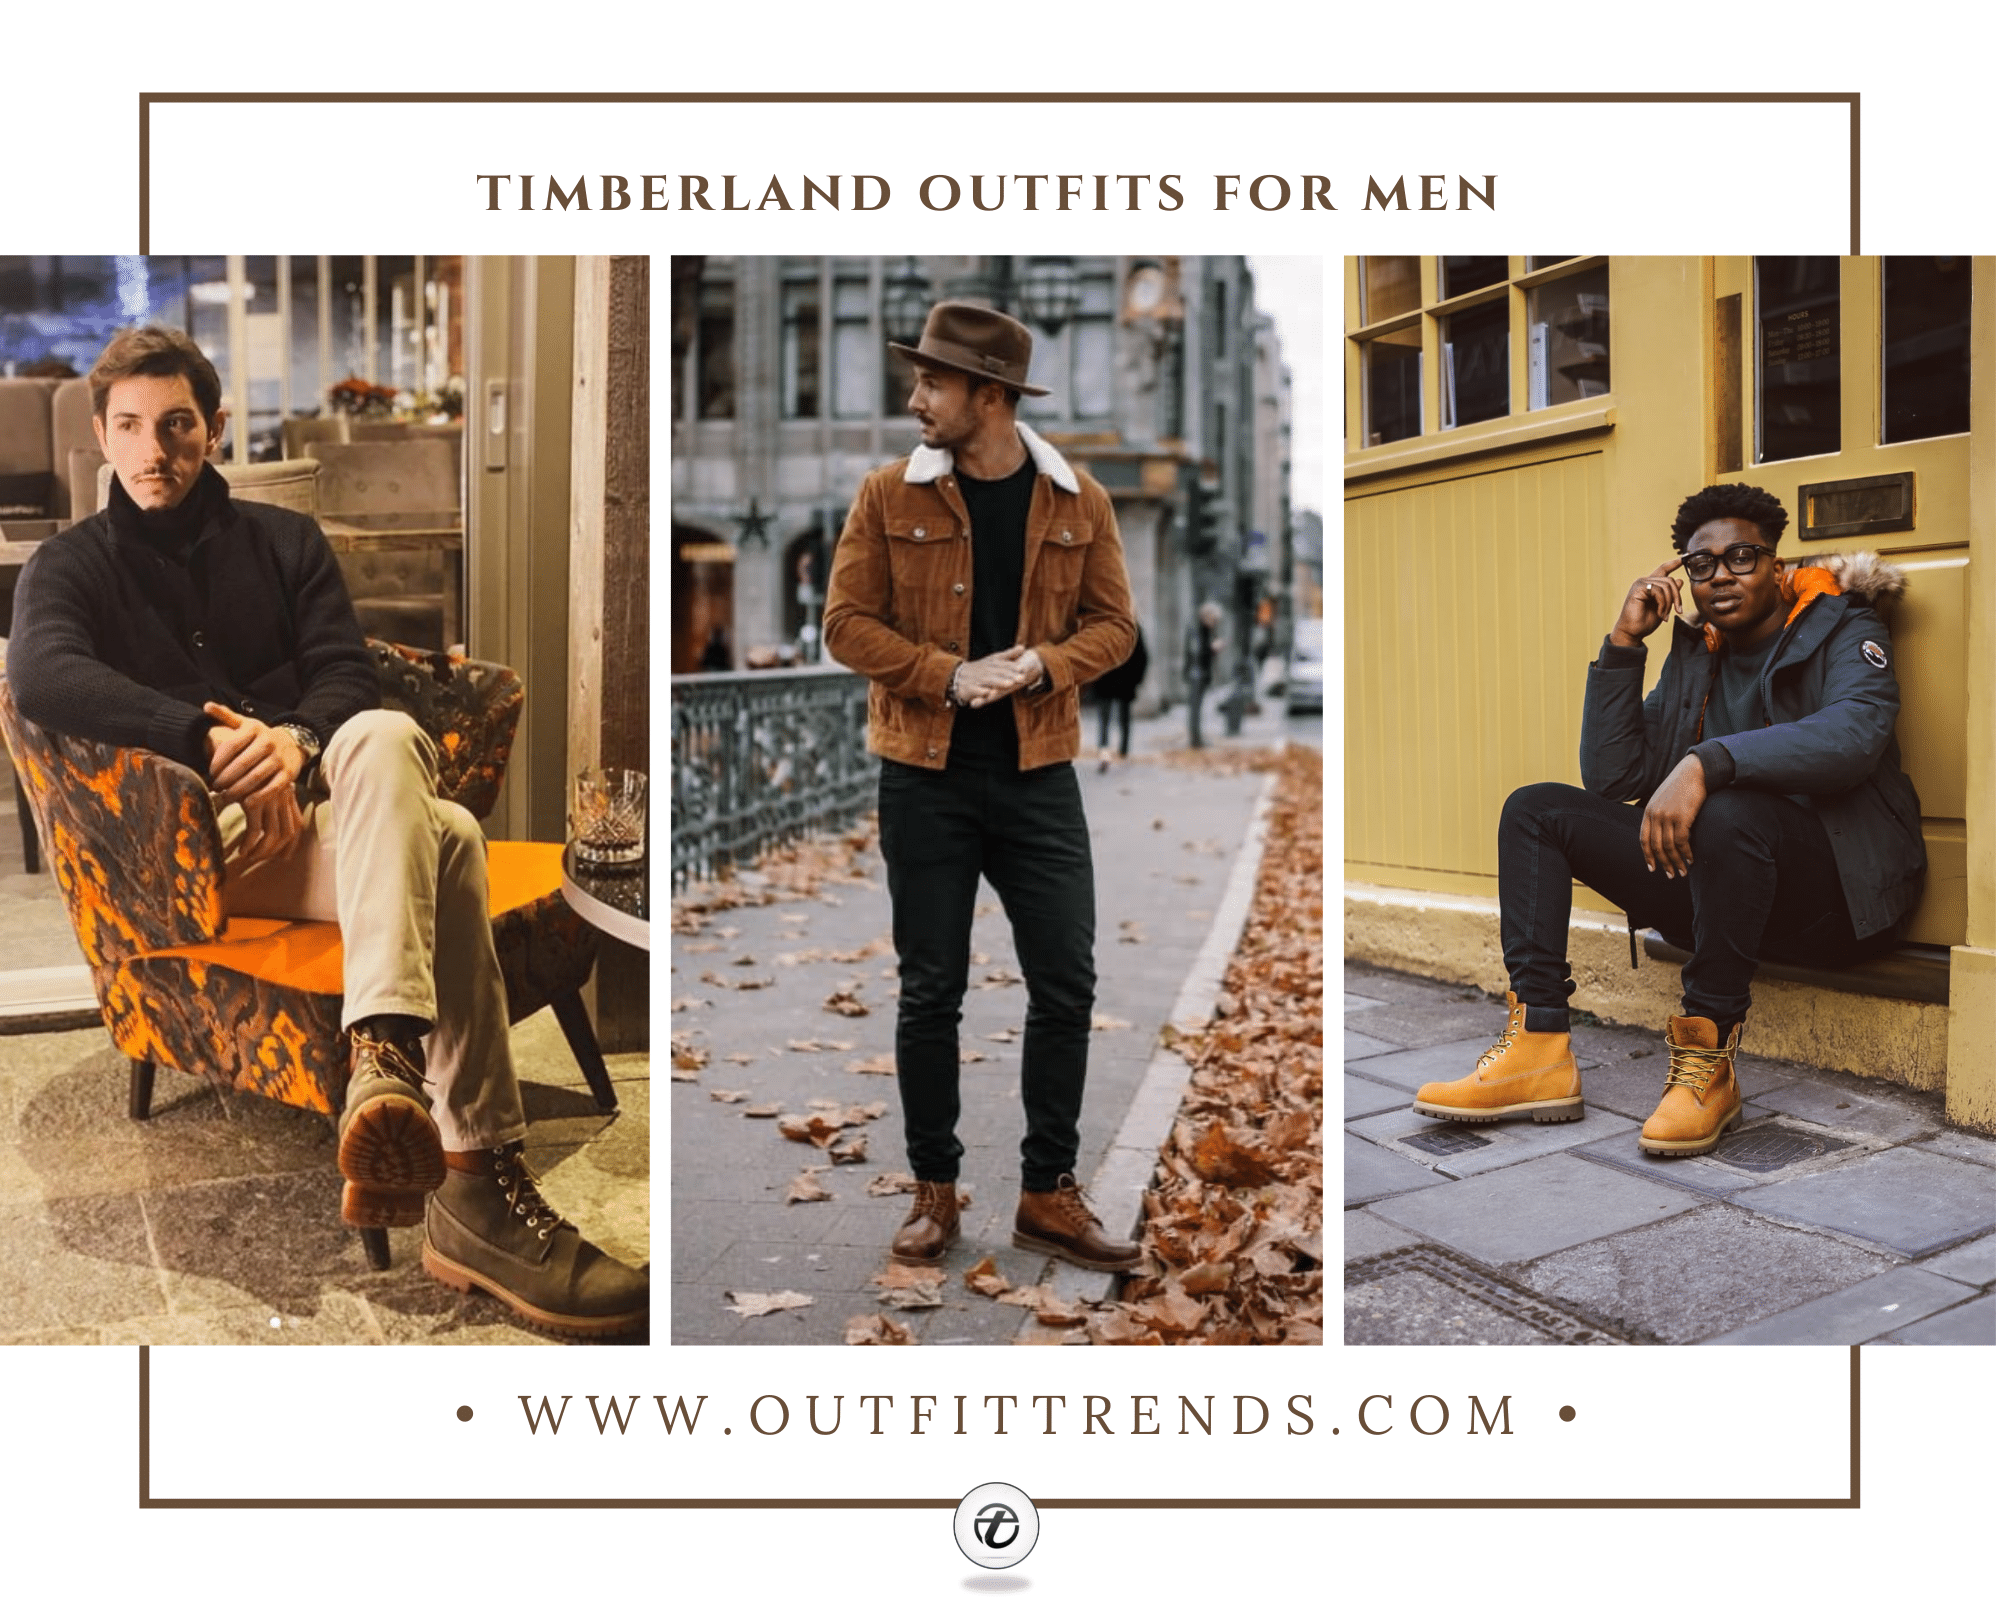 Cristo Administración Ballena barba How to Wear Timberland Boots for Men 27 Outfits with Timberland